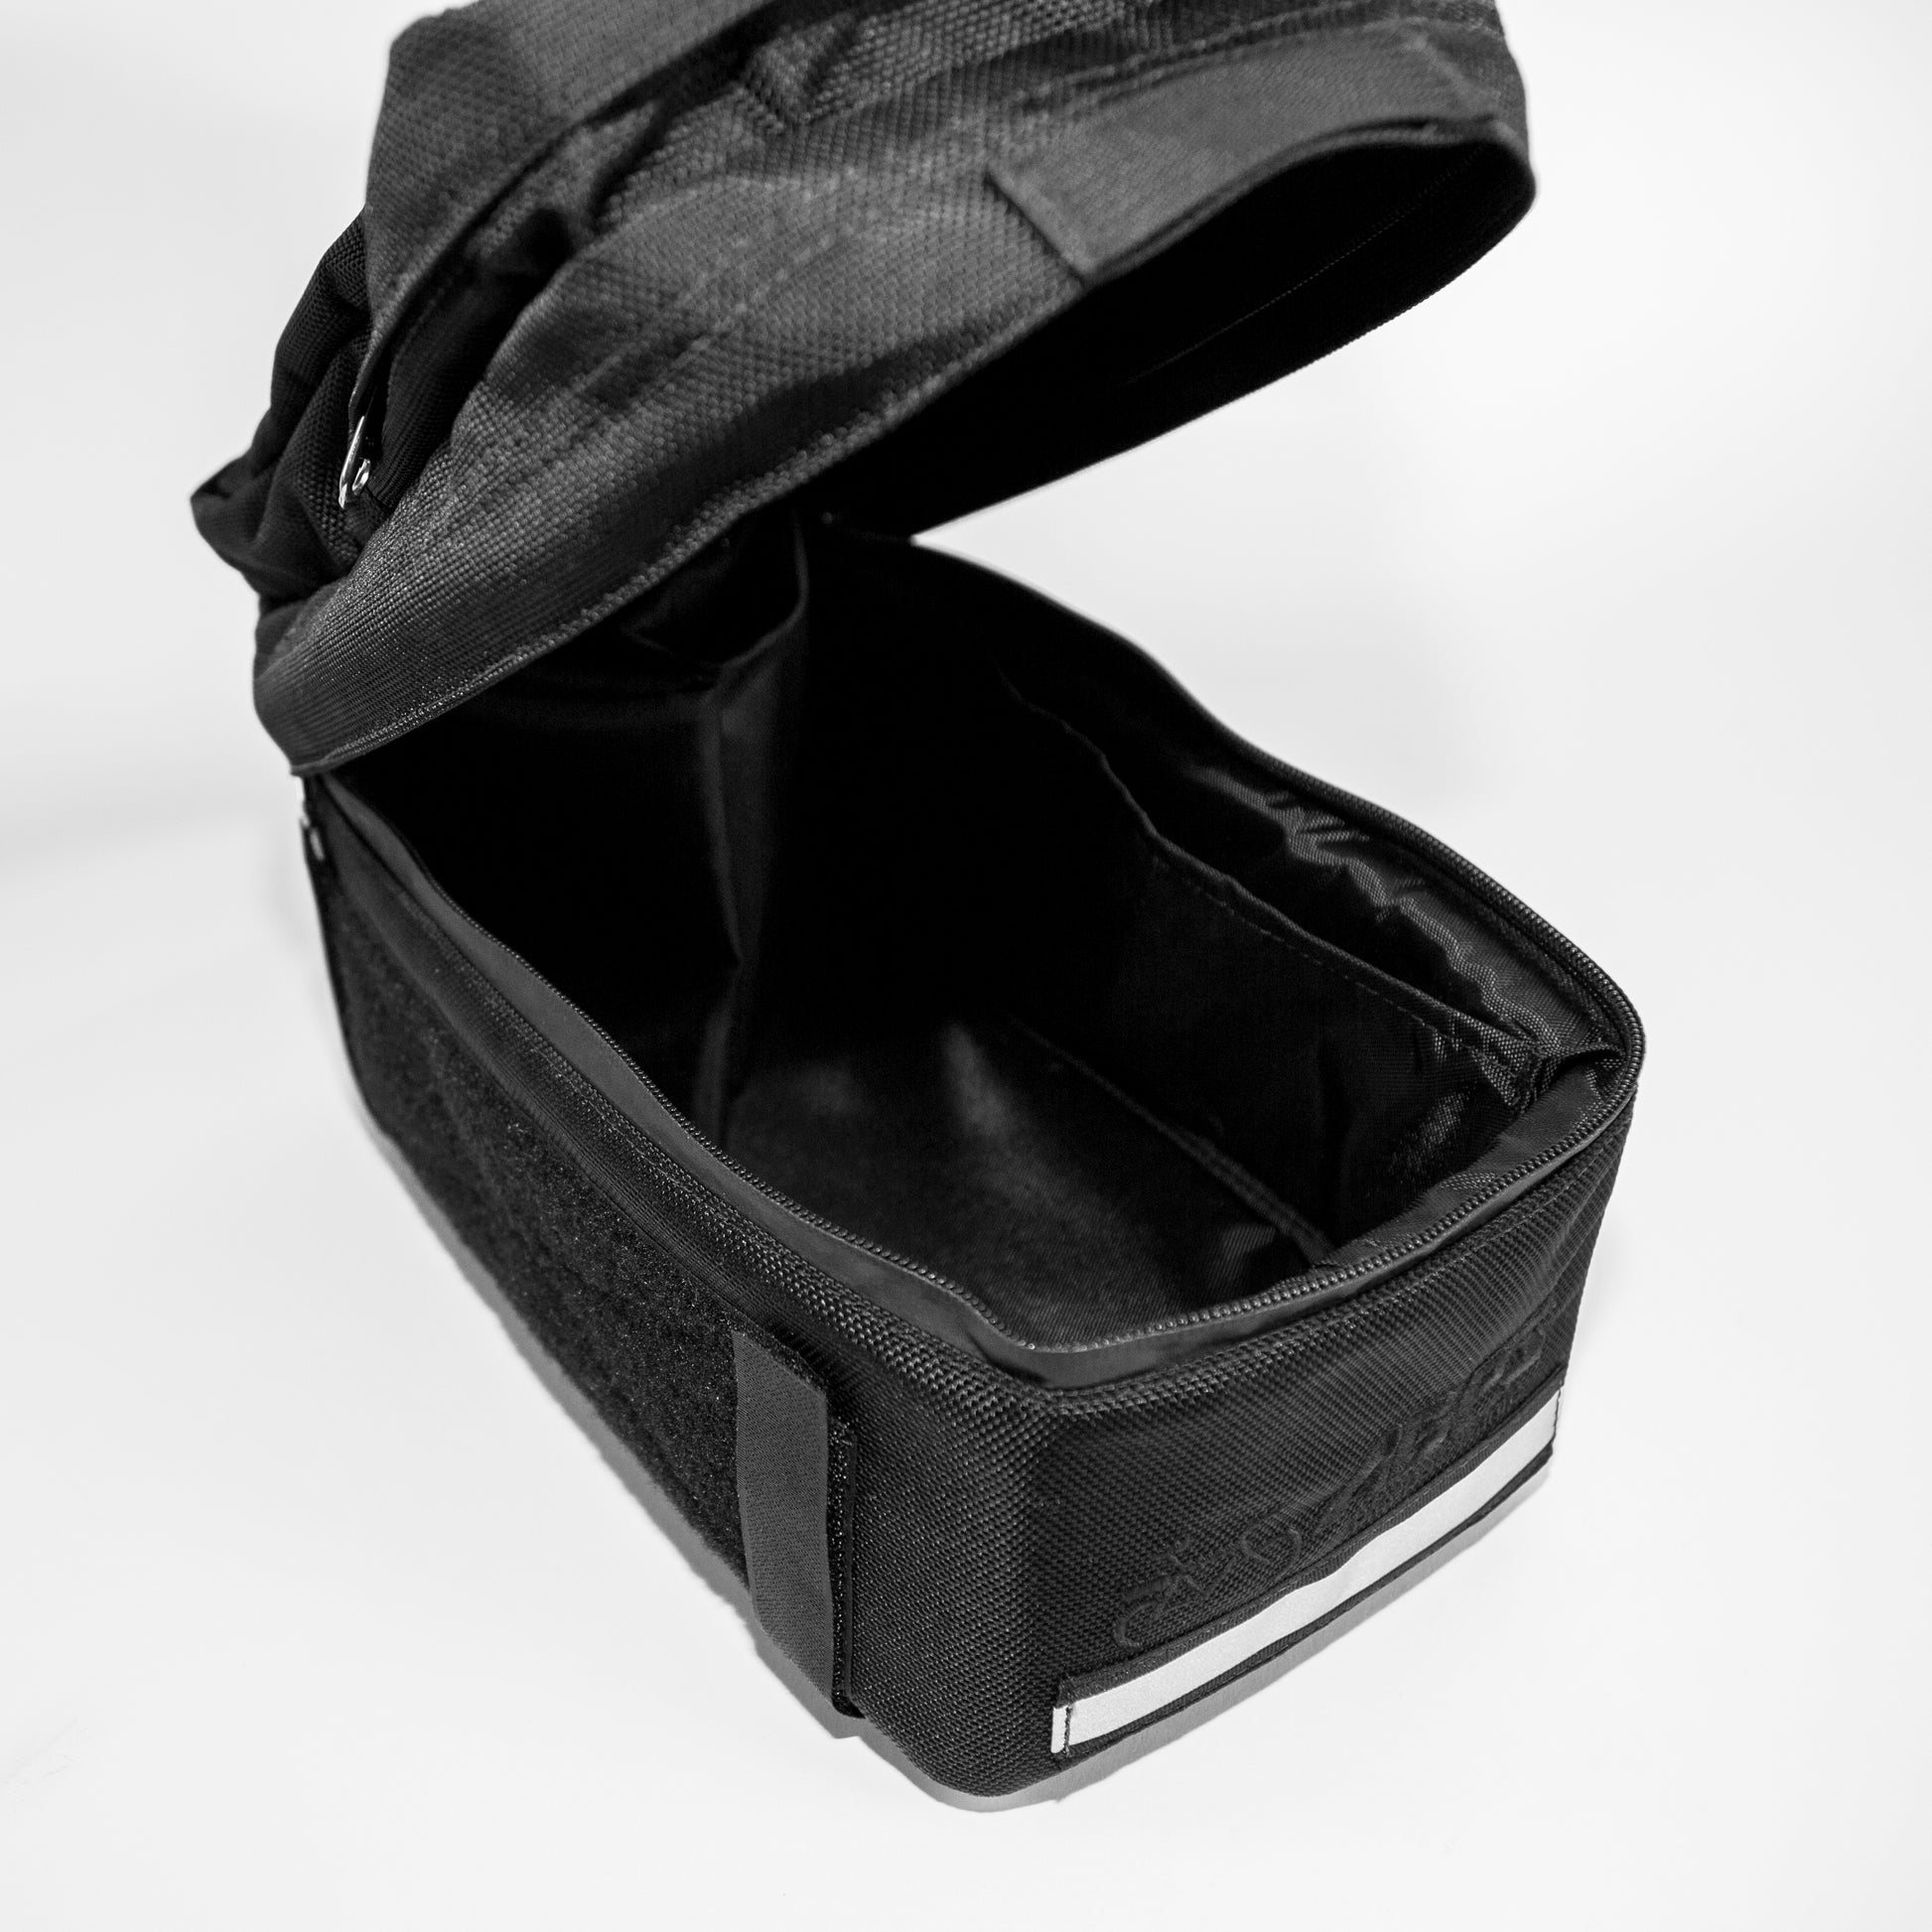 Rear trunk bag opened showing the inside of the bag.